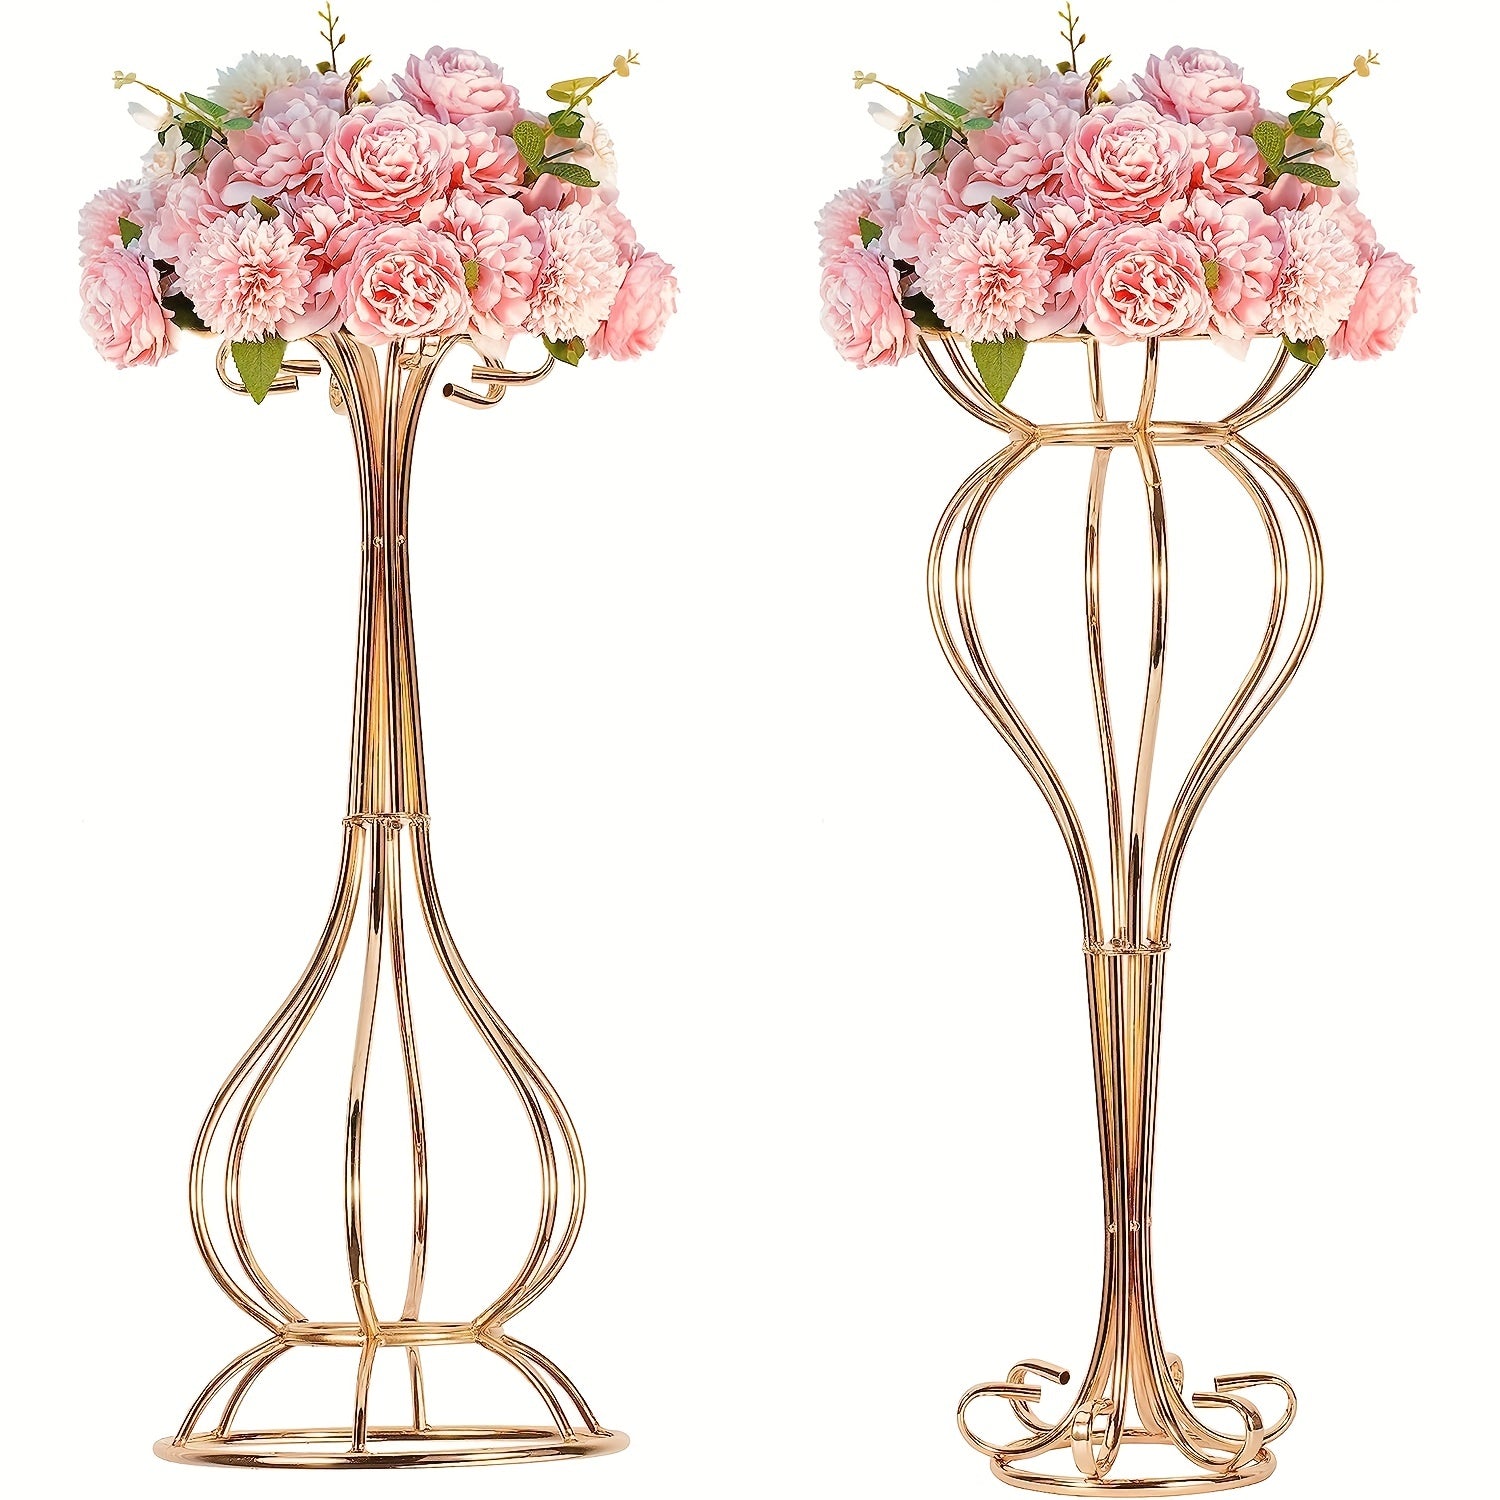 2pcs, Golden Flower Vases Stand For Table Centerpiece, Metal Trumpet Stands For Wedding Road-Leading, 25.6inch Tall Tabletop Flower Stands For Home Birthday Christmas Decor